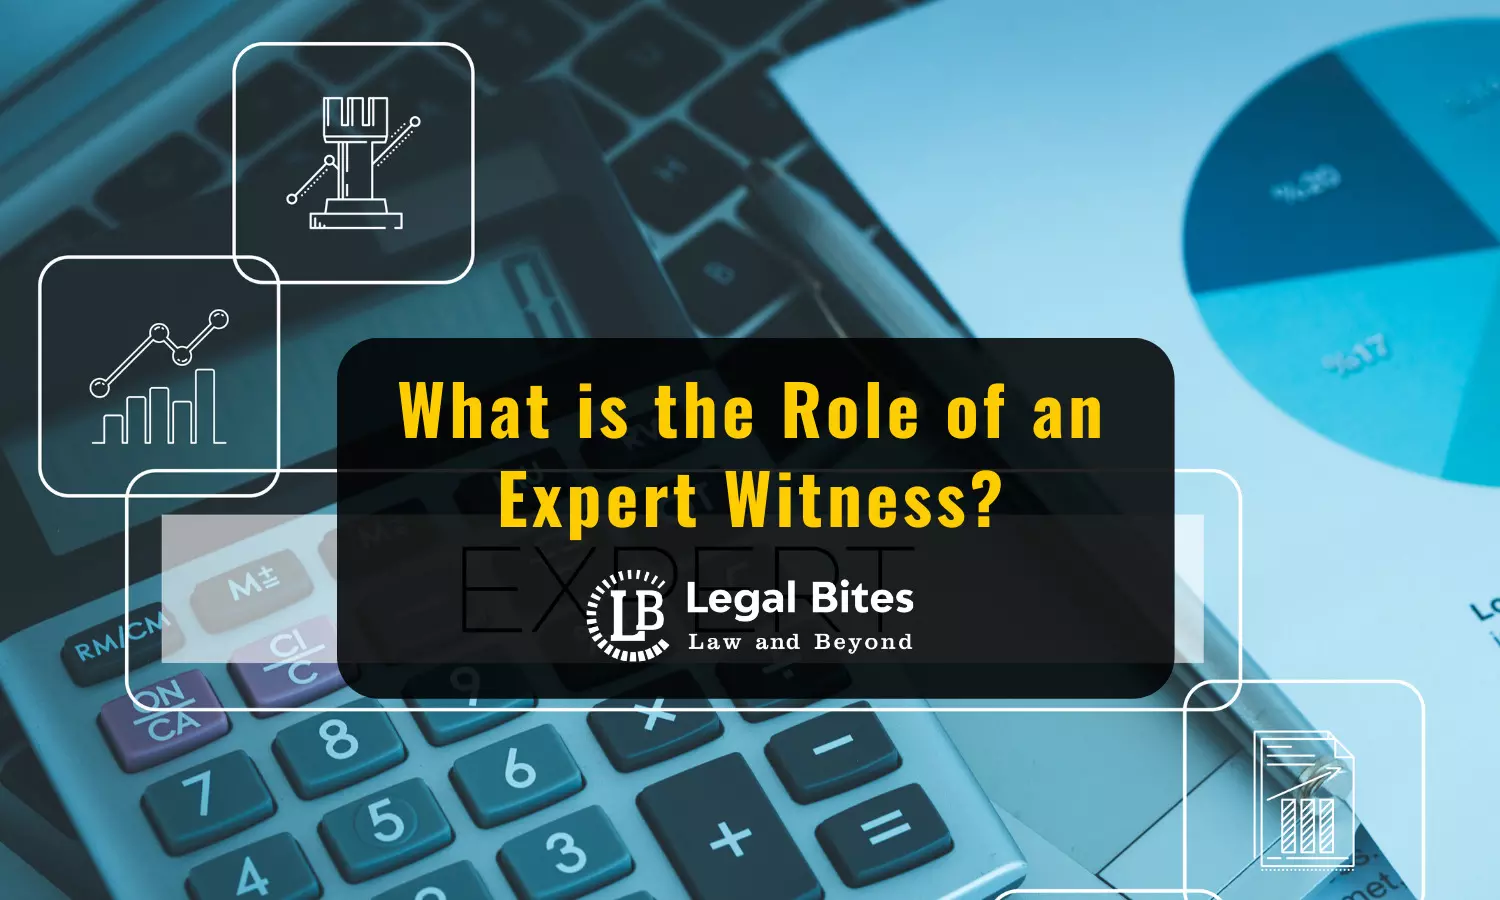 What is the Role of an Expert Witness?